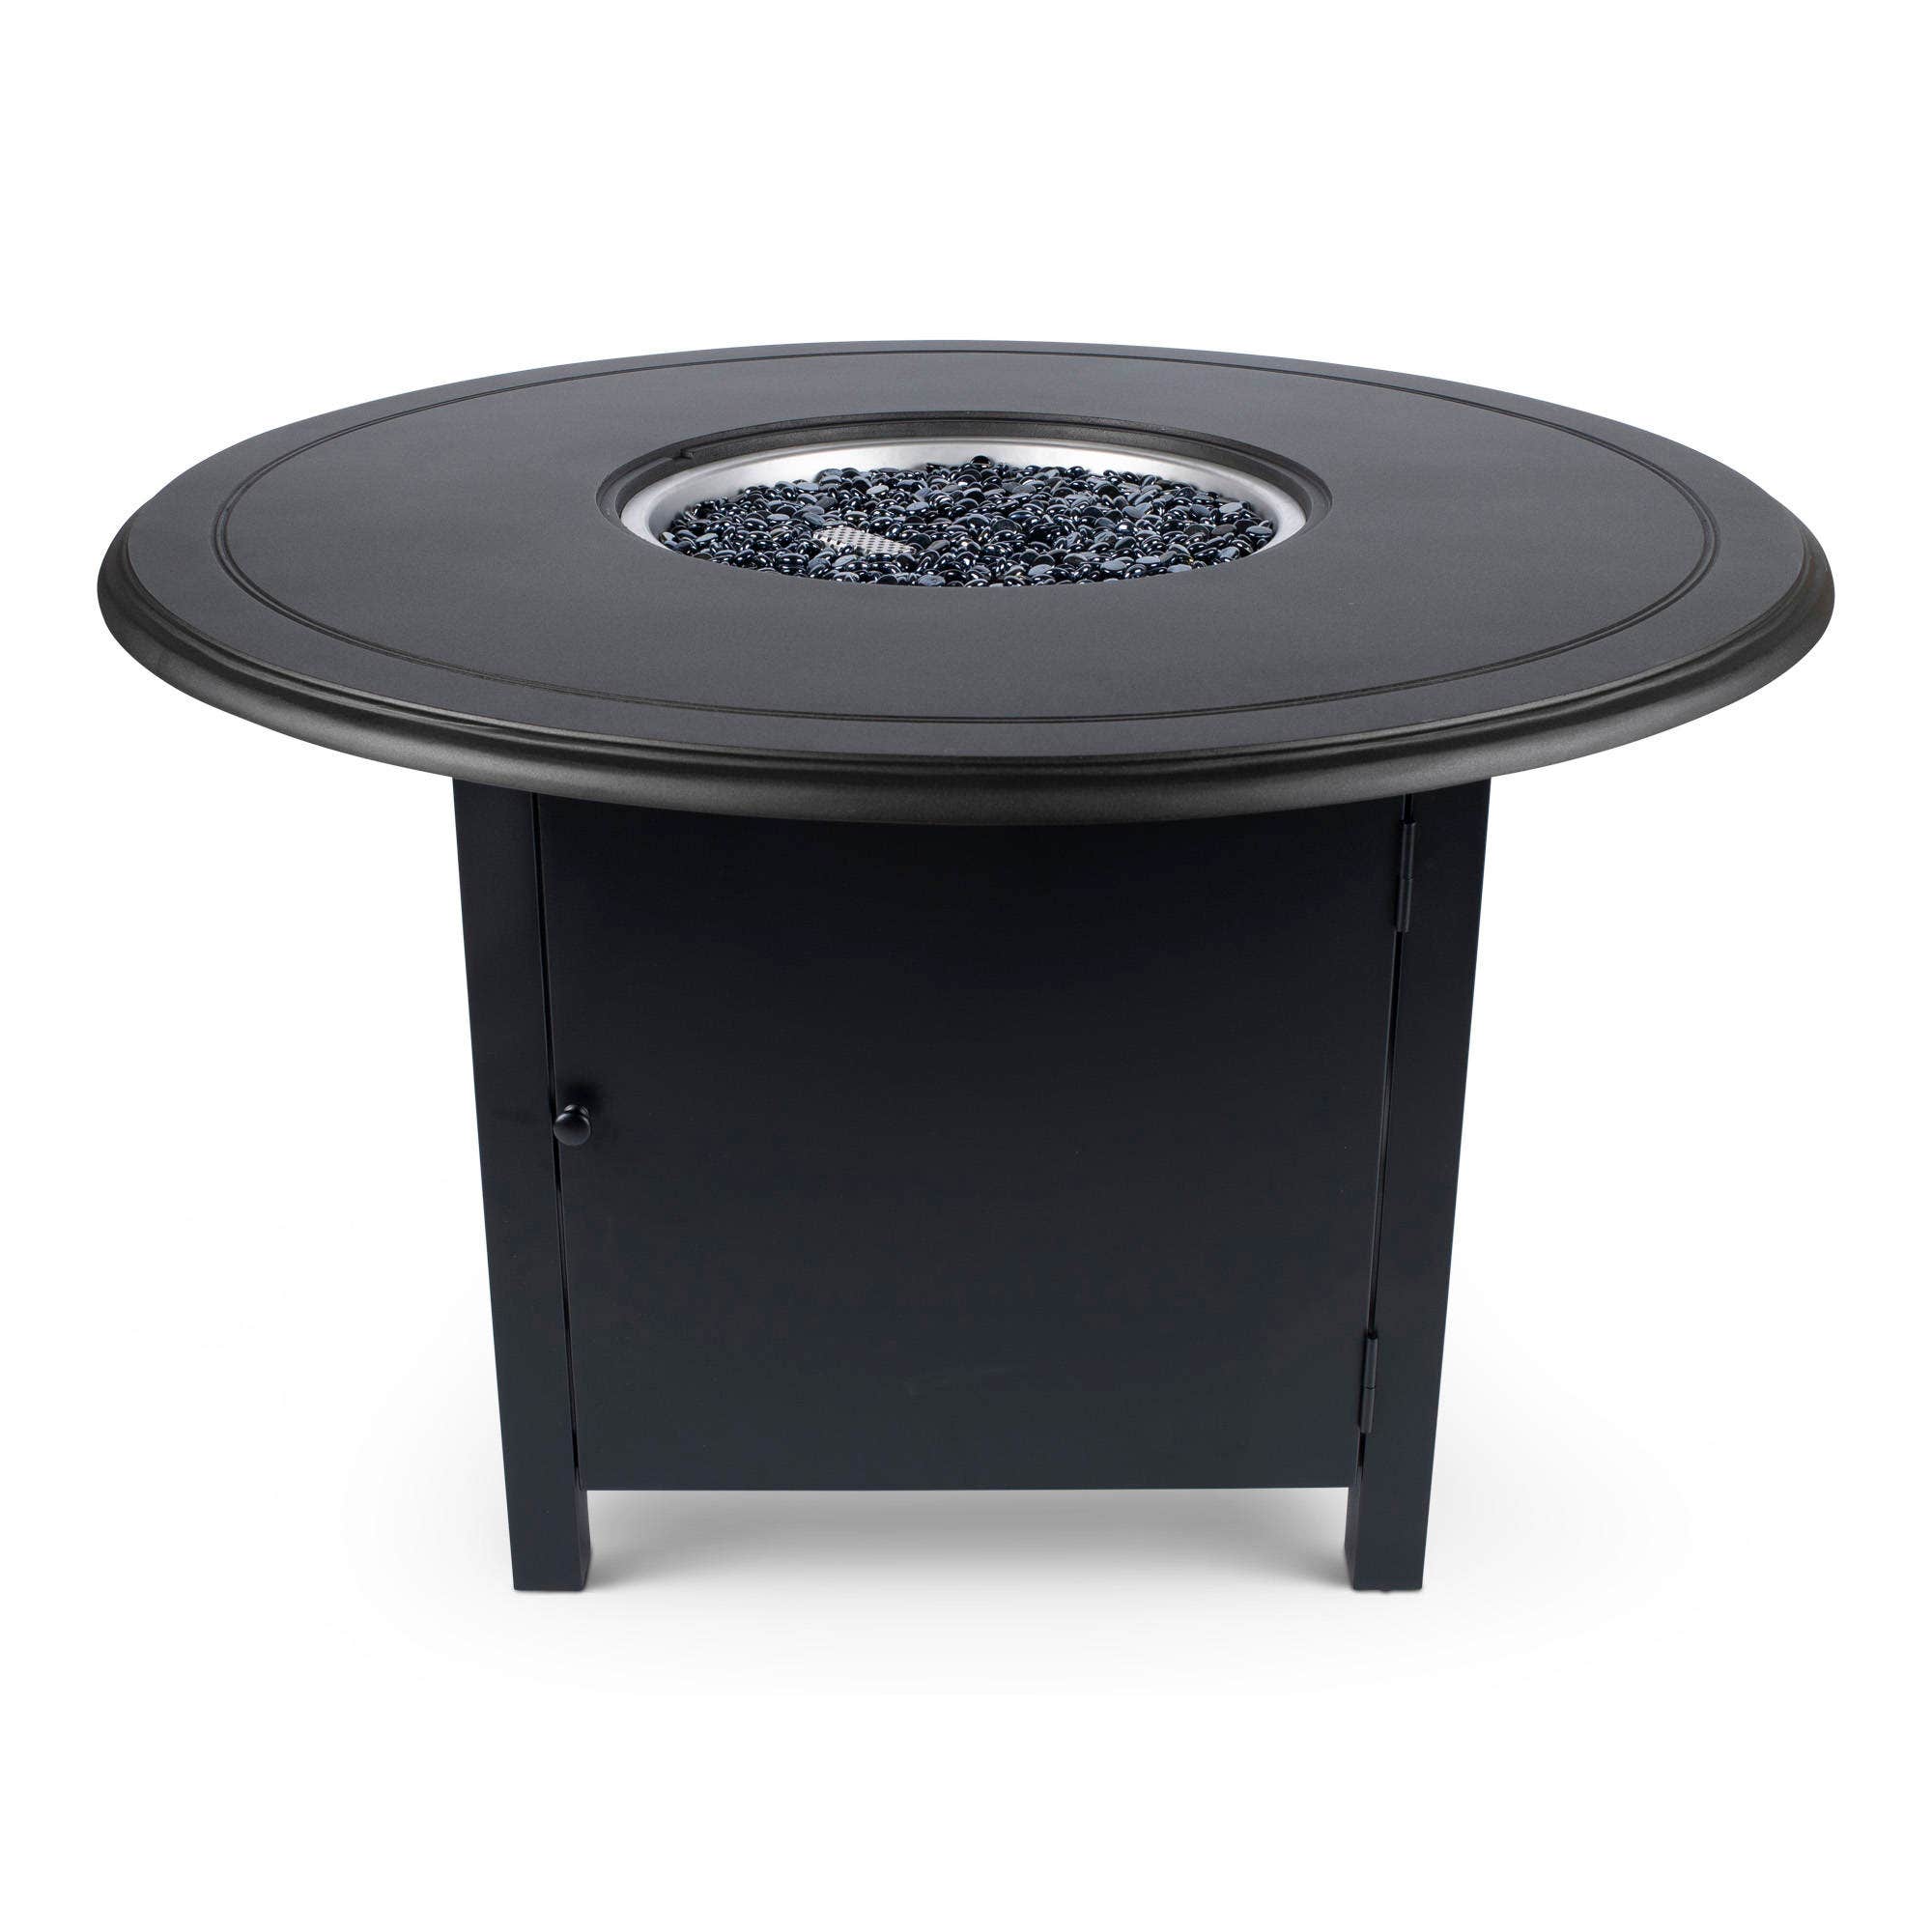 Woodard 48 inch Round Solid Cast with Beaded Edge Top Dining Fire Table in Twilight and Textured Black 12037568